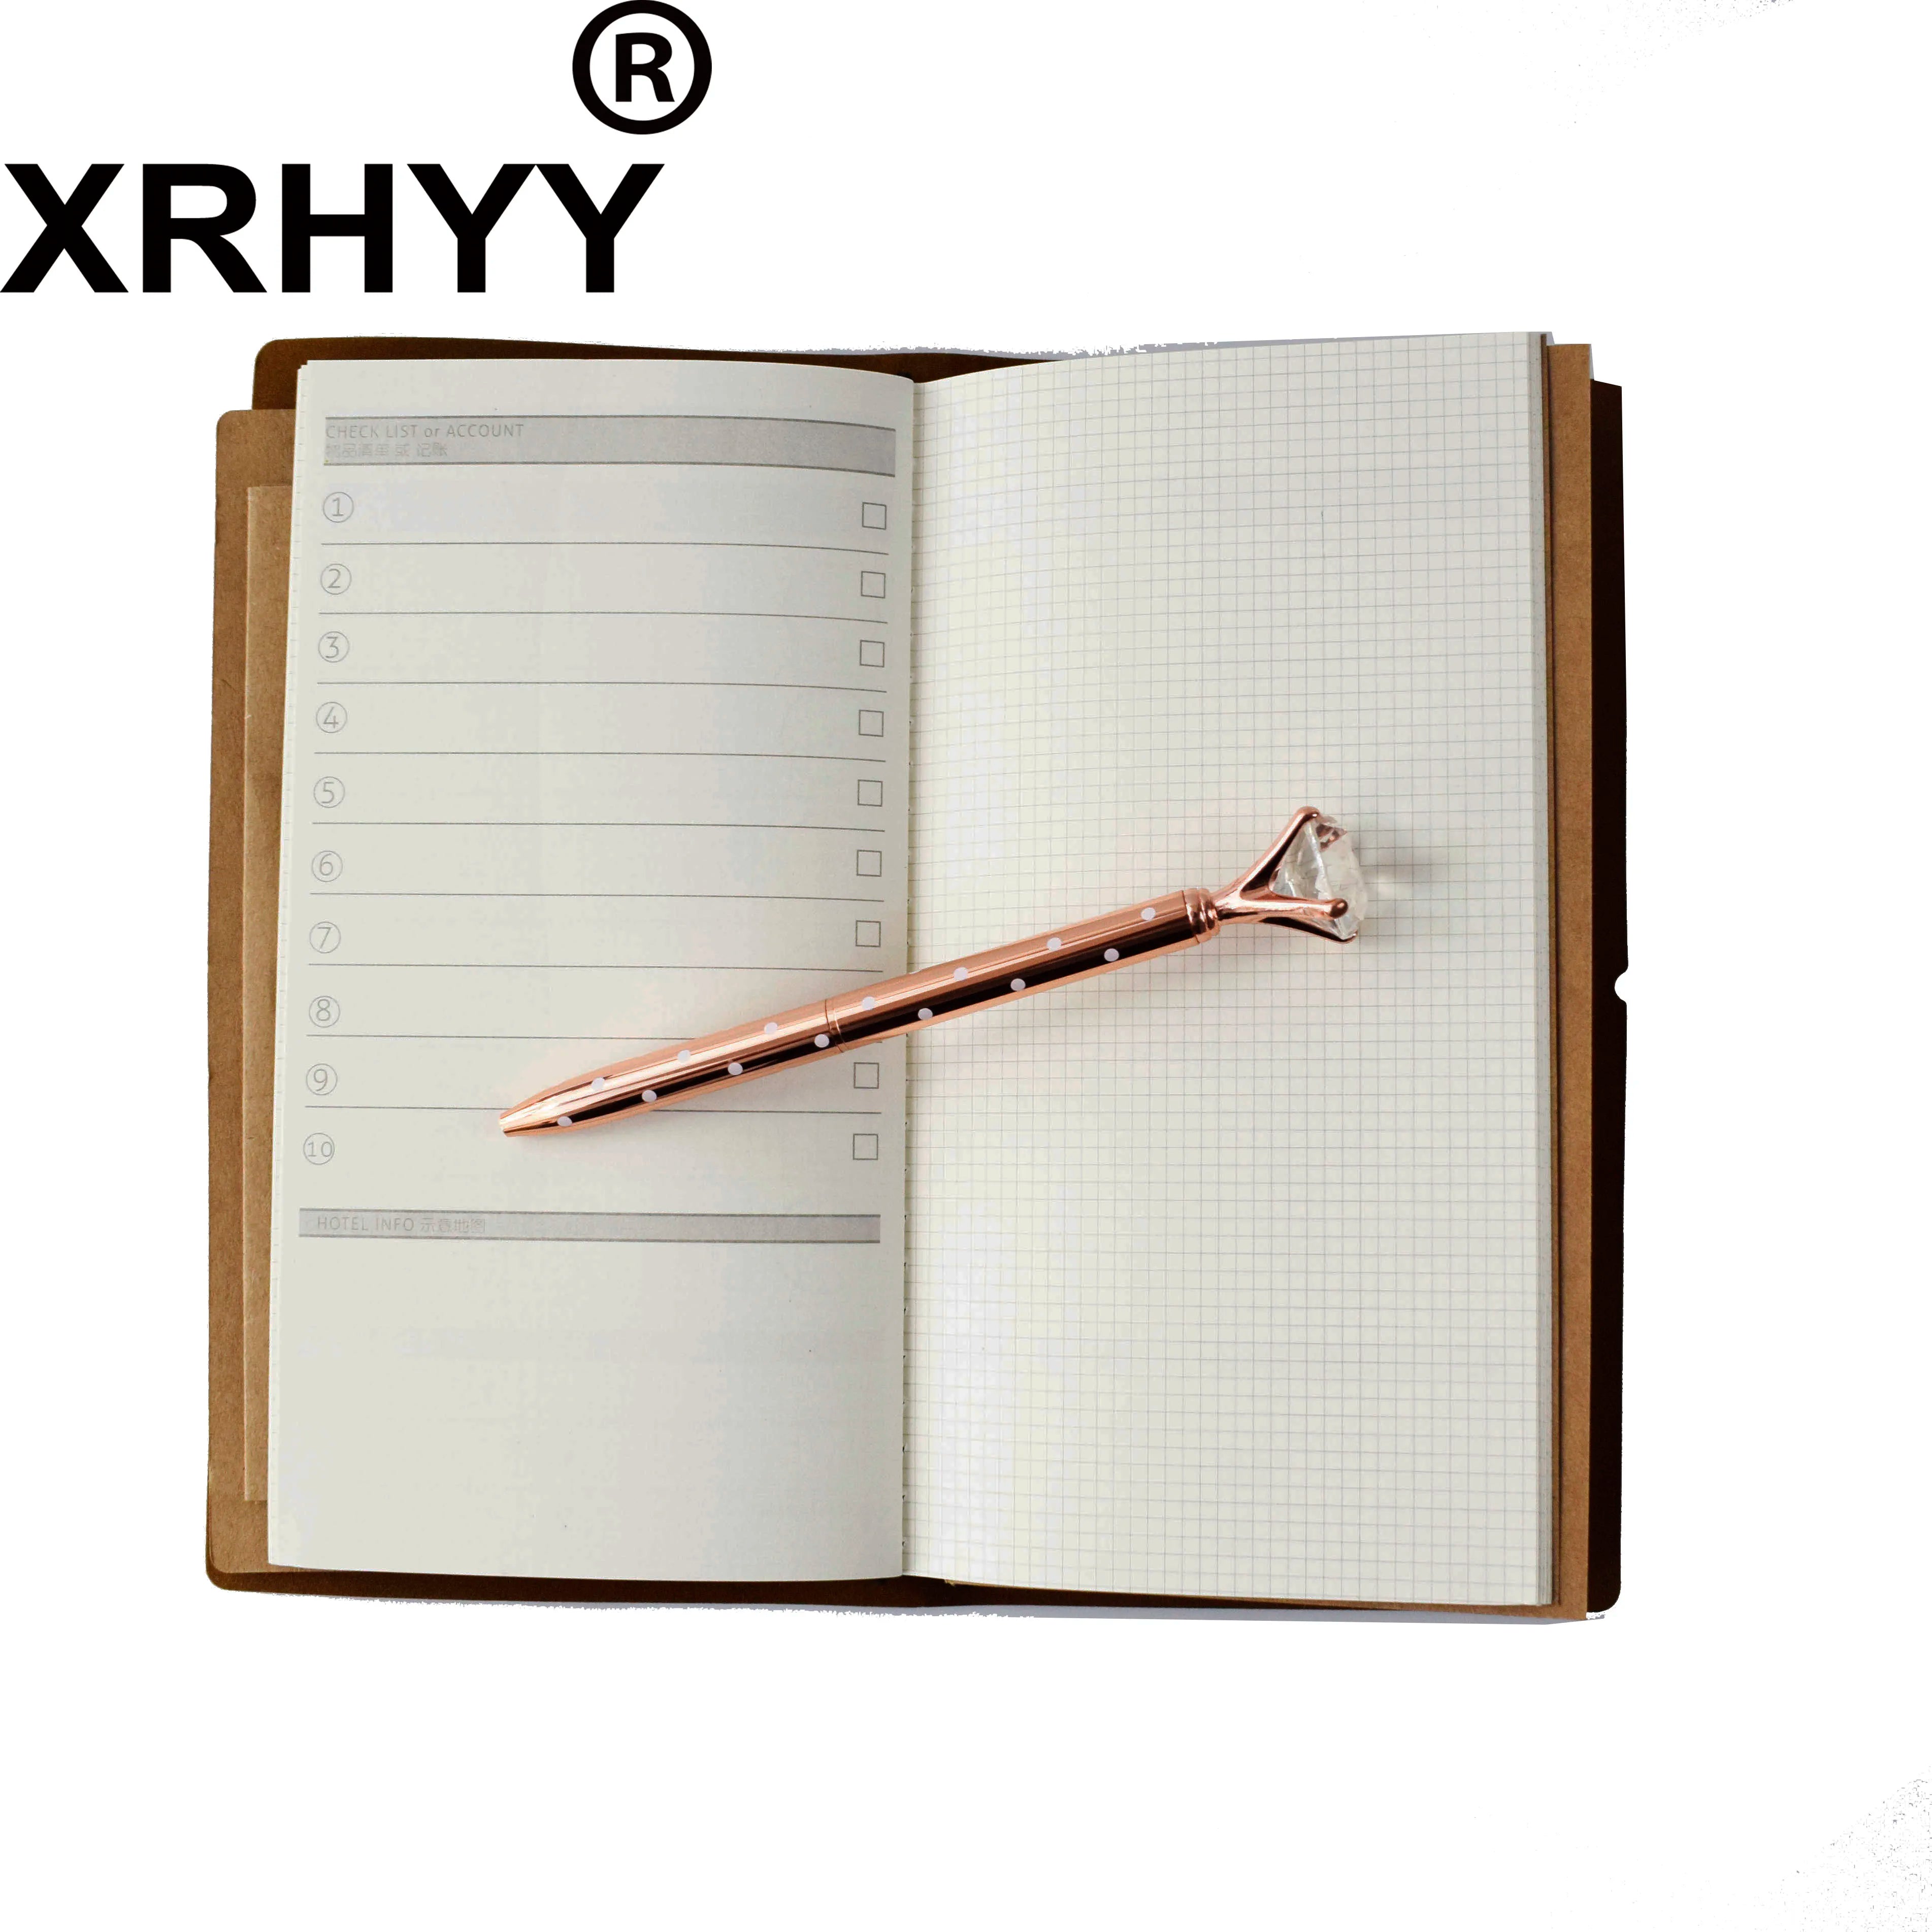 XRHYY Vintage Traveler's Notebook Hard Cover Planner Diary Book Exercise Composition Binding Notepad